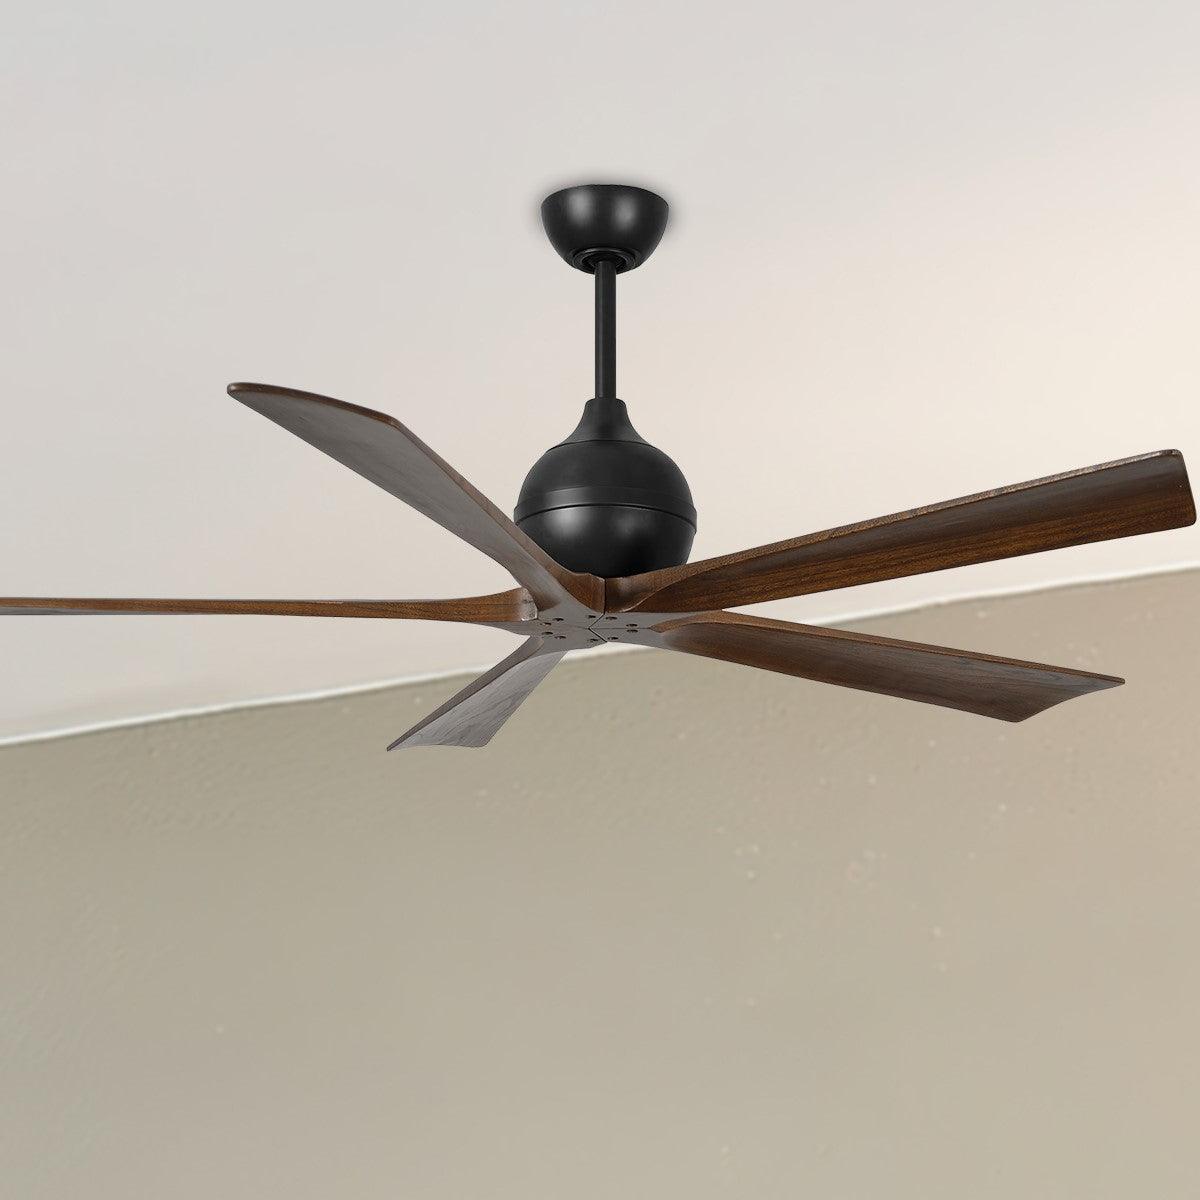 Irene 60 Inch 5 Blades Modern Outdoor Ceiling Fan With Remote And Wall Control